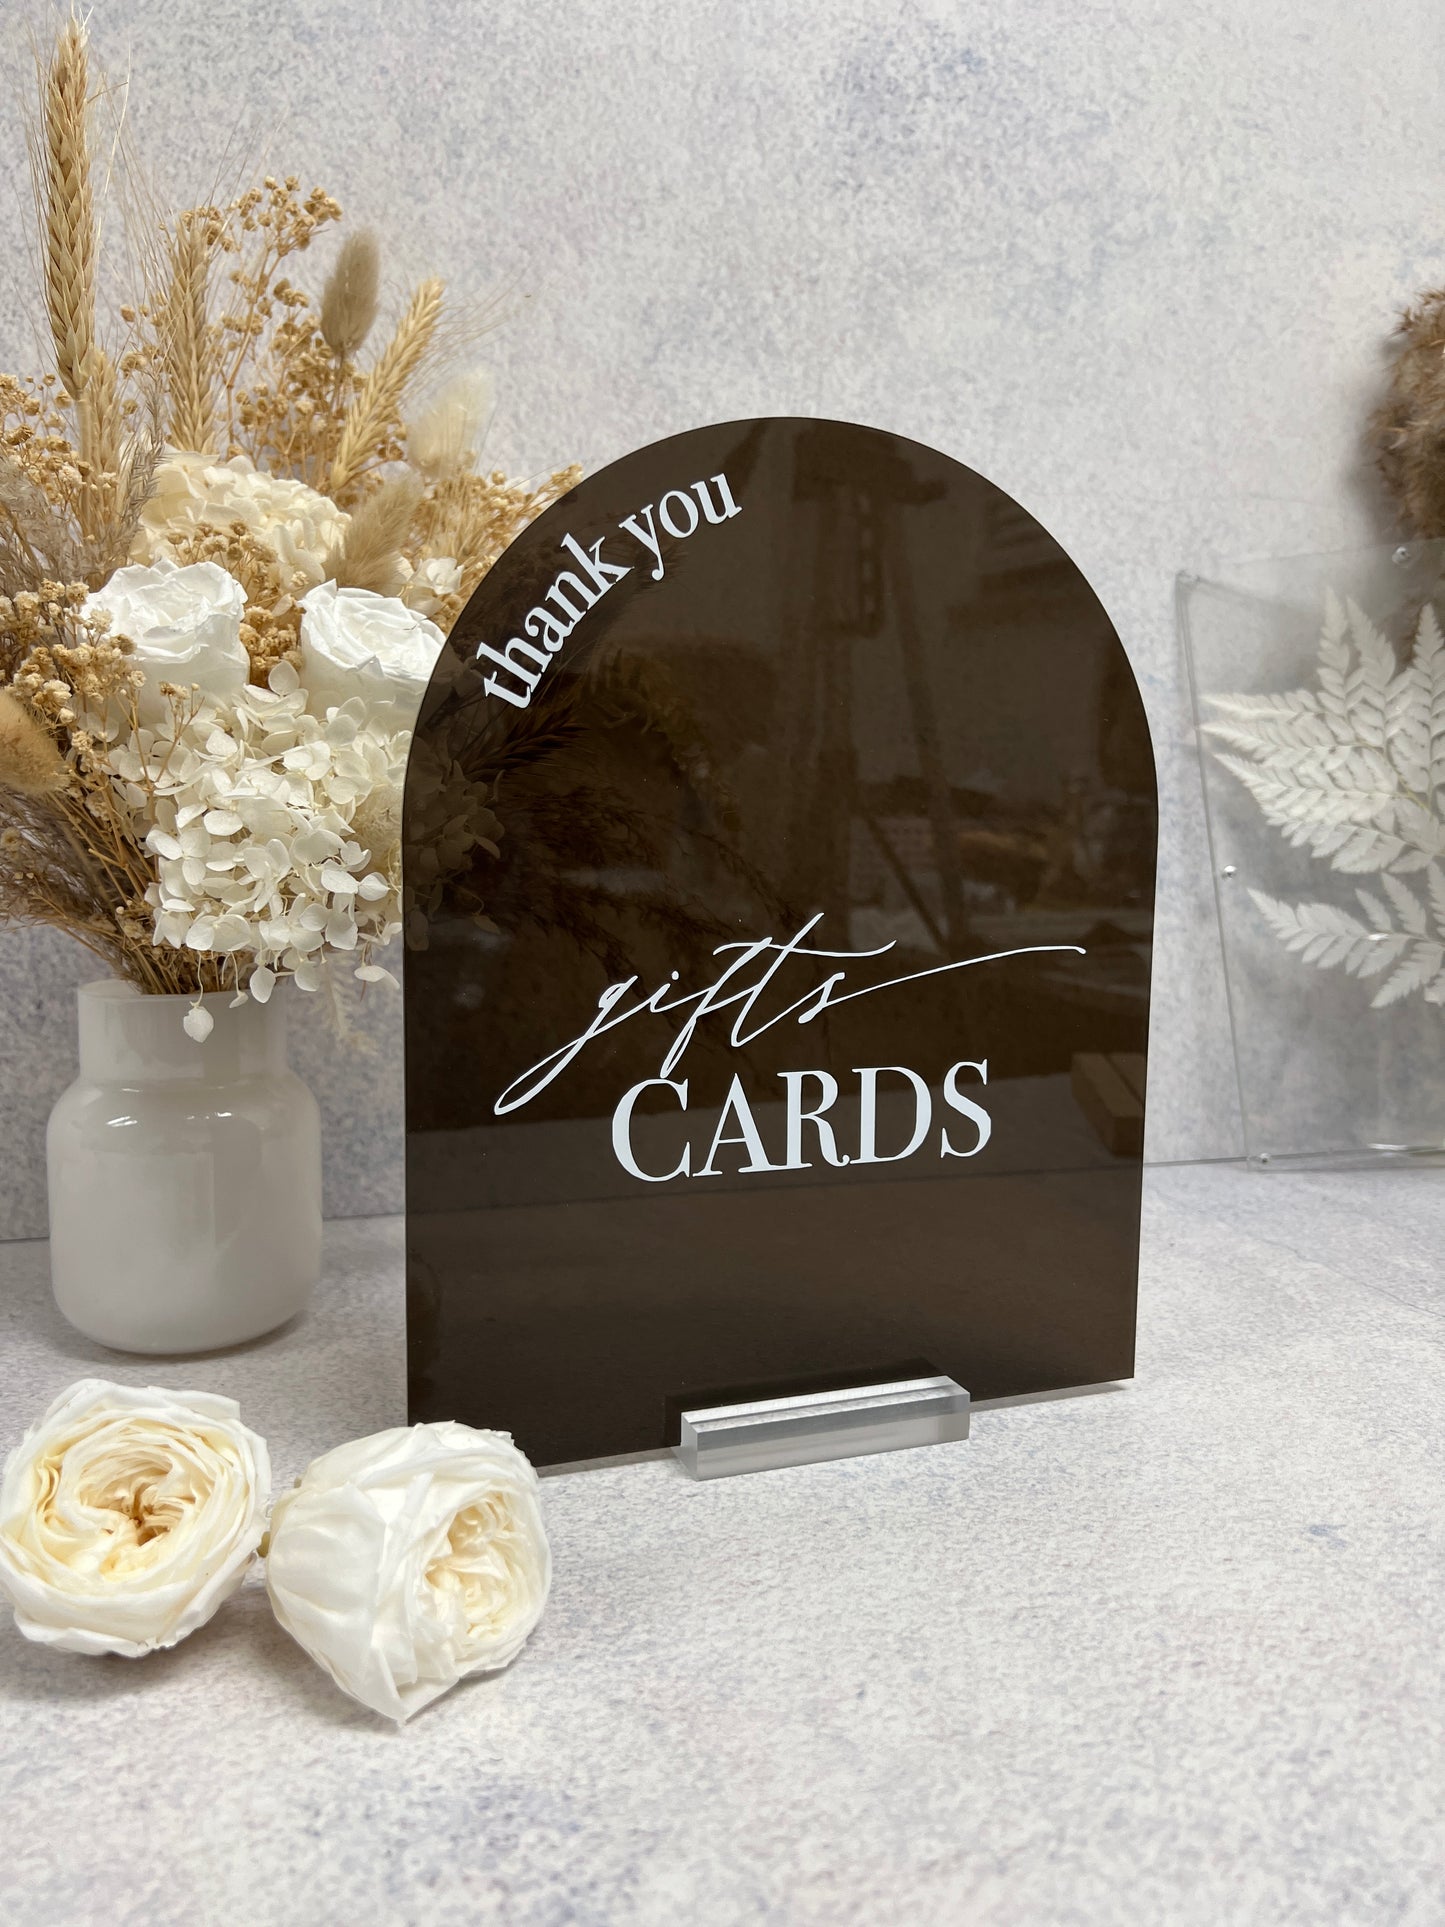 Cards & Gifts Arch Table Sign - Minimal font